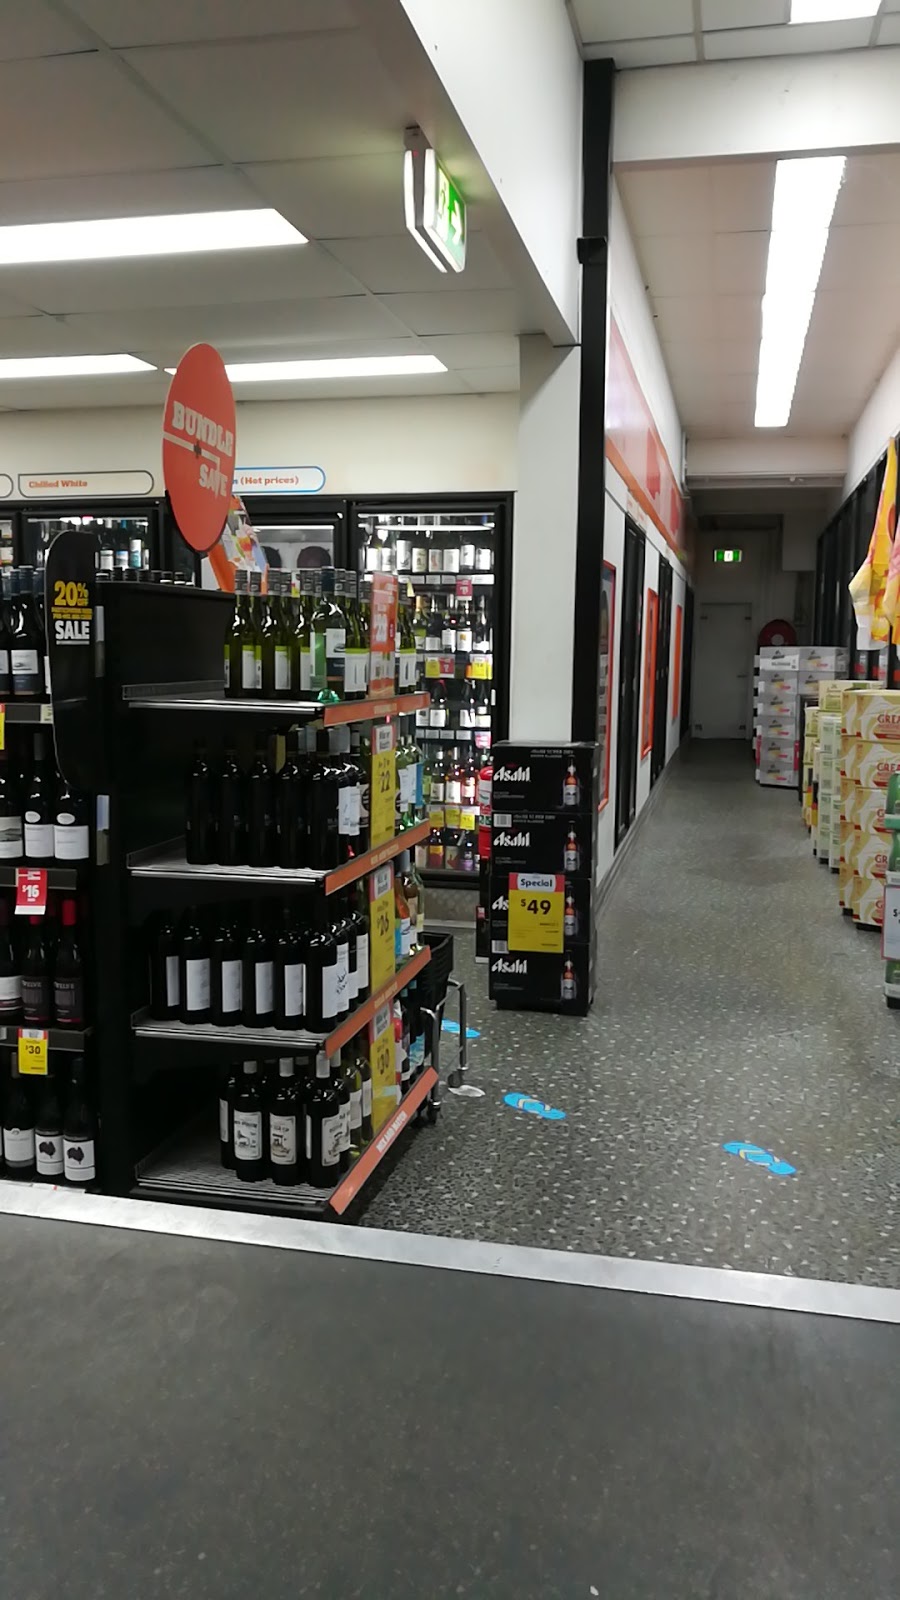 BWS Edge Hill Drive | store | 145-147 Pease St, Cairns City QLD 4870, Australia | 0740534811 OR +61 7 4053 4811